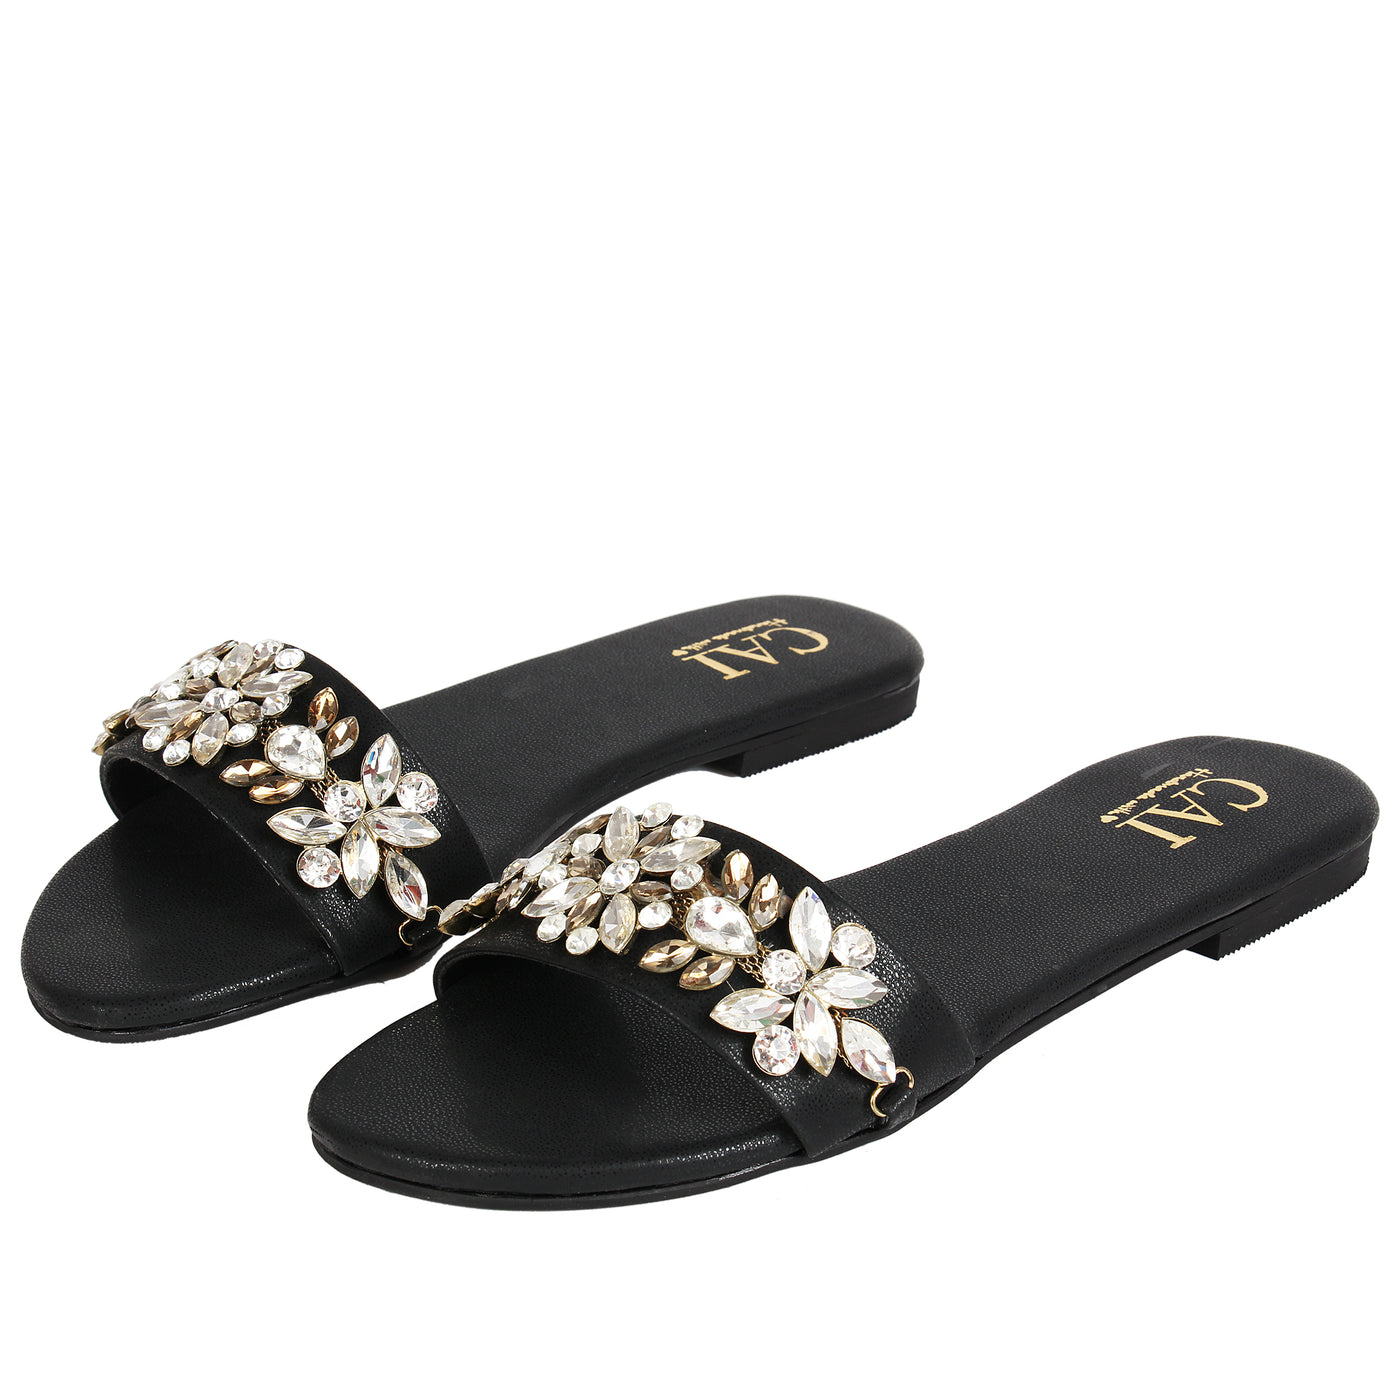 flat sandals for ladies at cai store